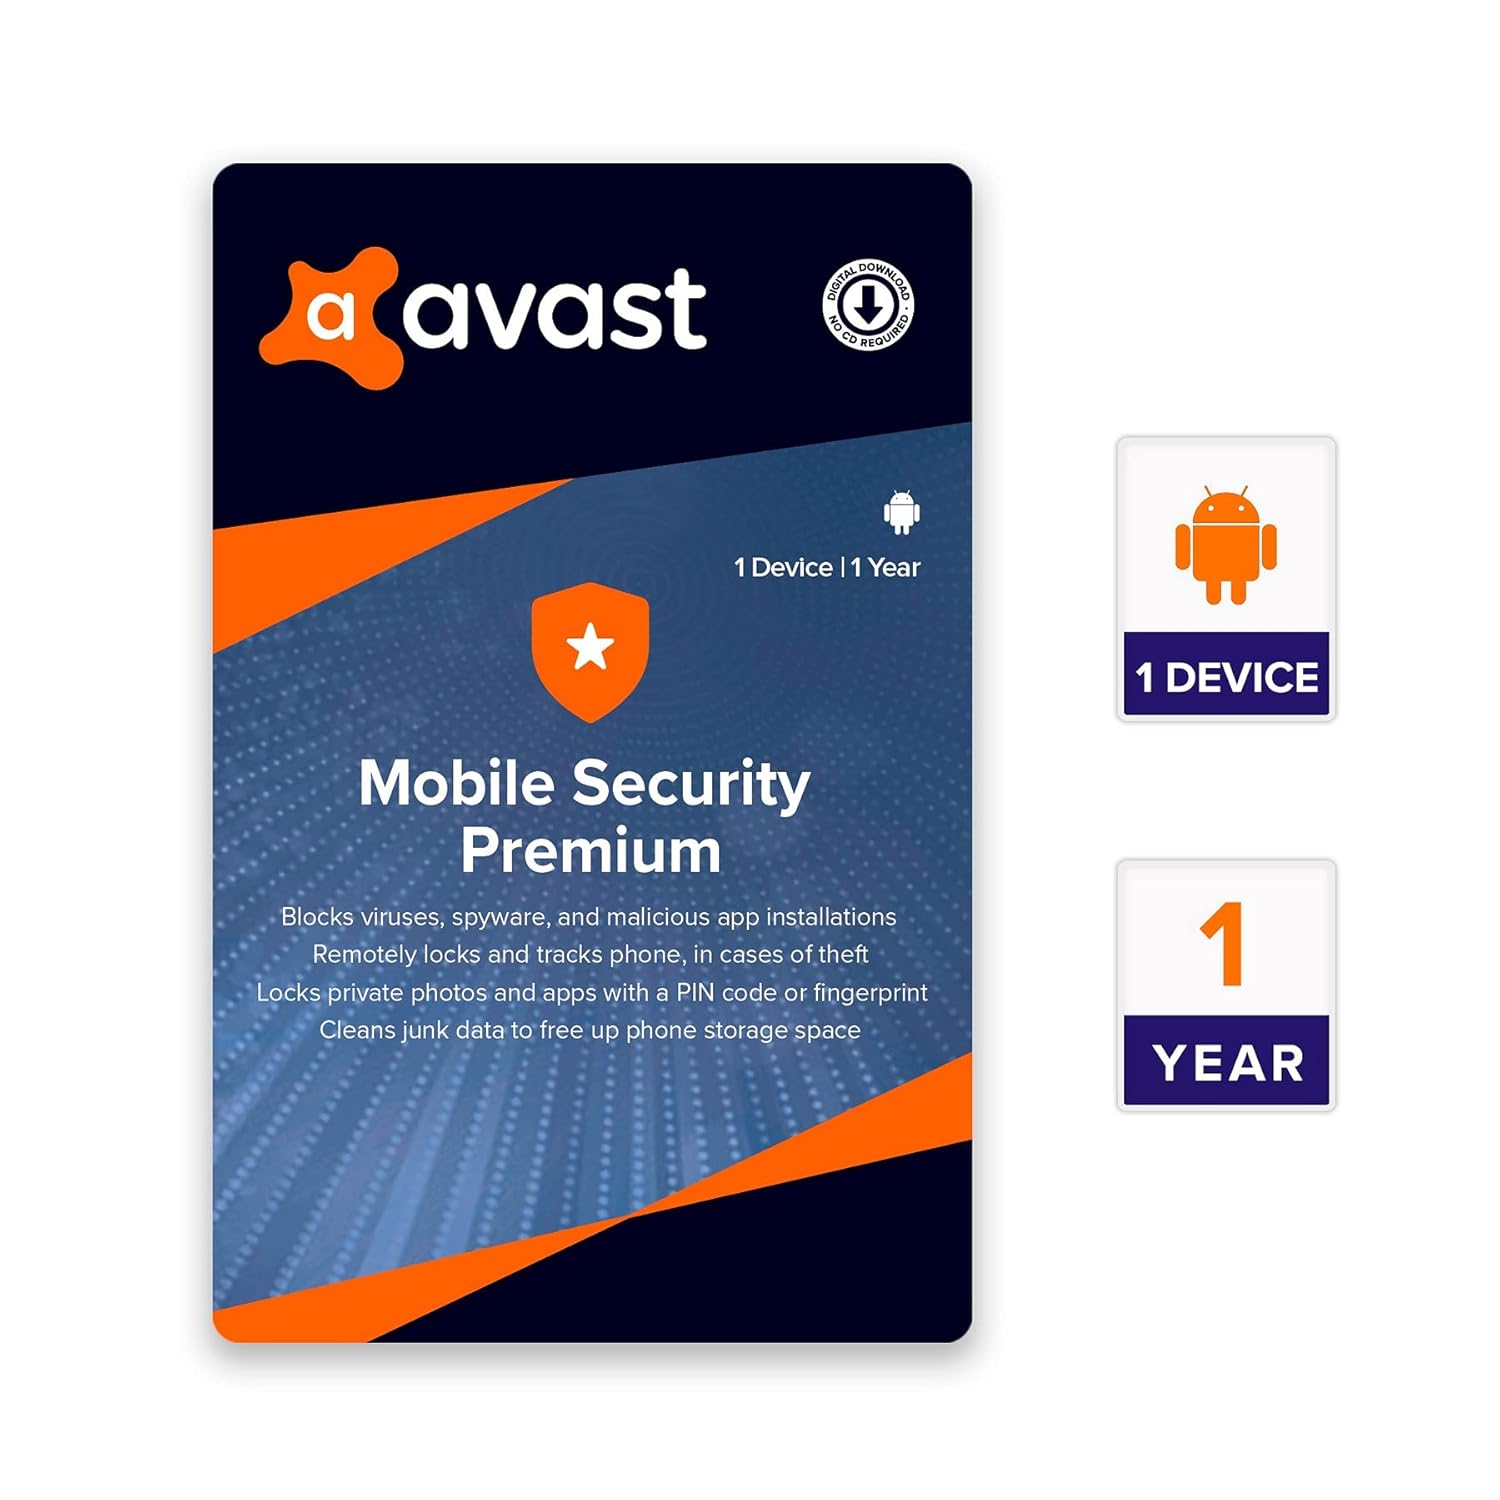 Avast Ultimate Mobile Security Premium for Android 2023 Key (1 Year / 1 Device) USD 7.41